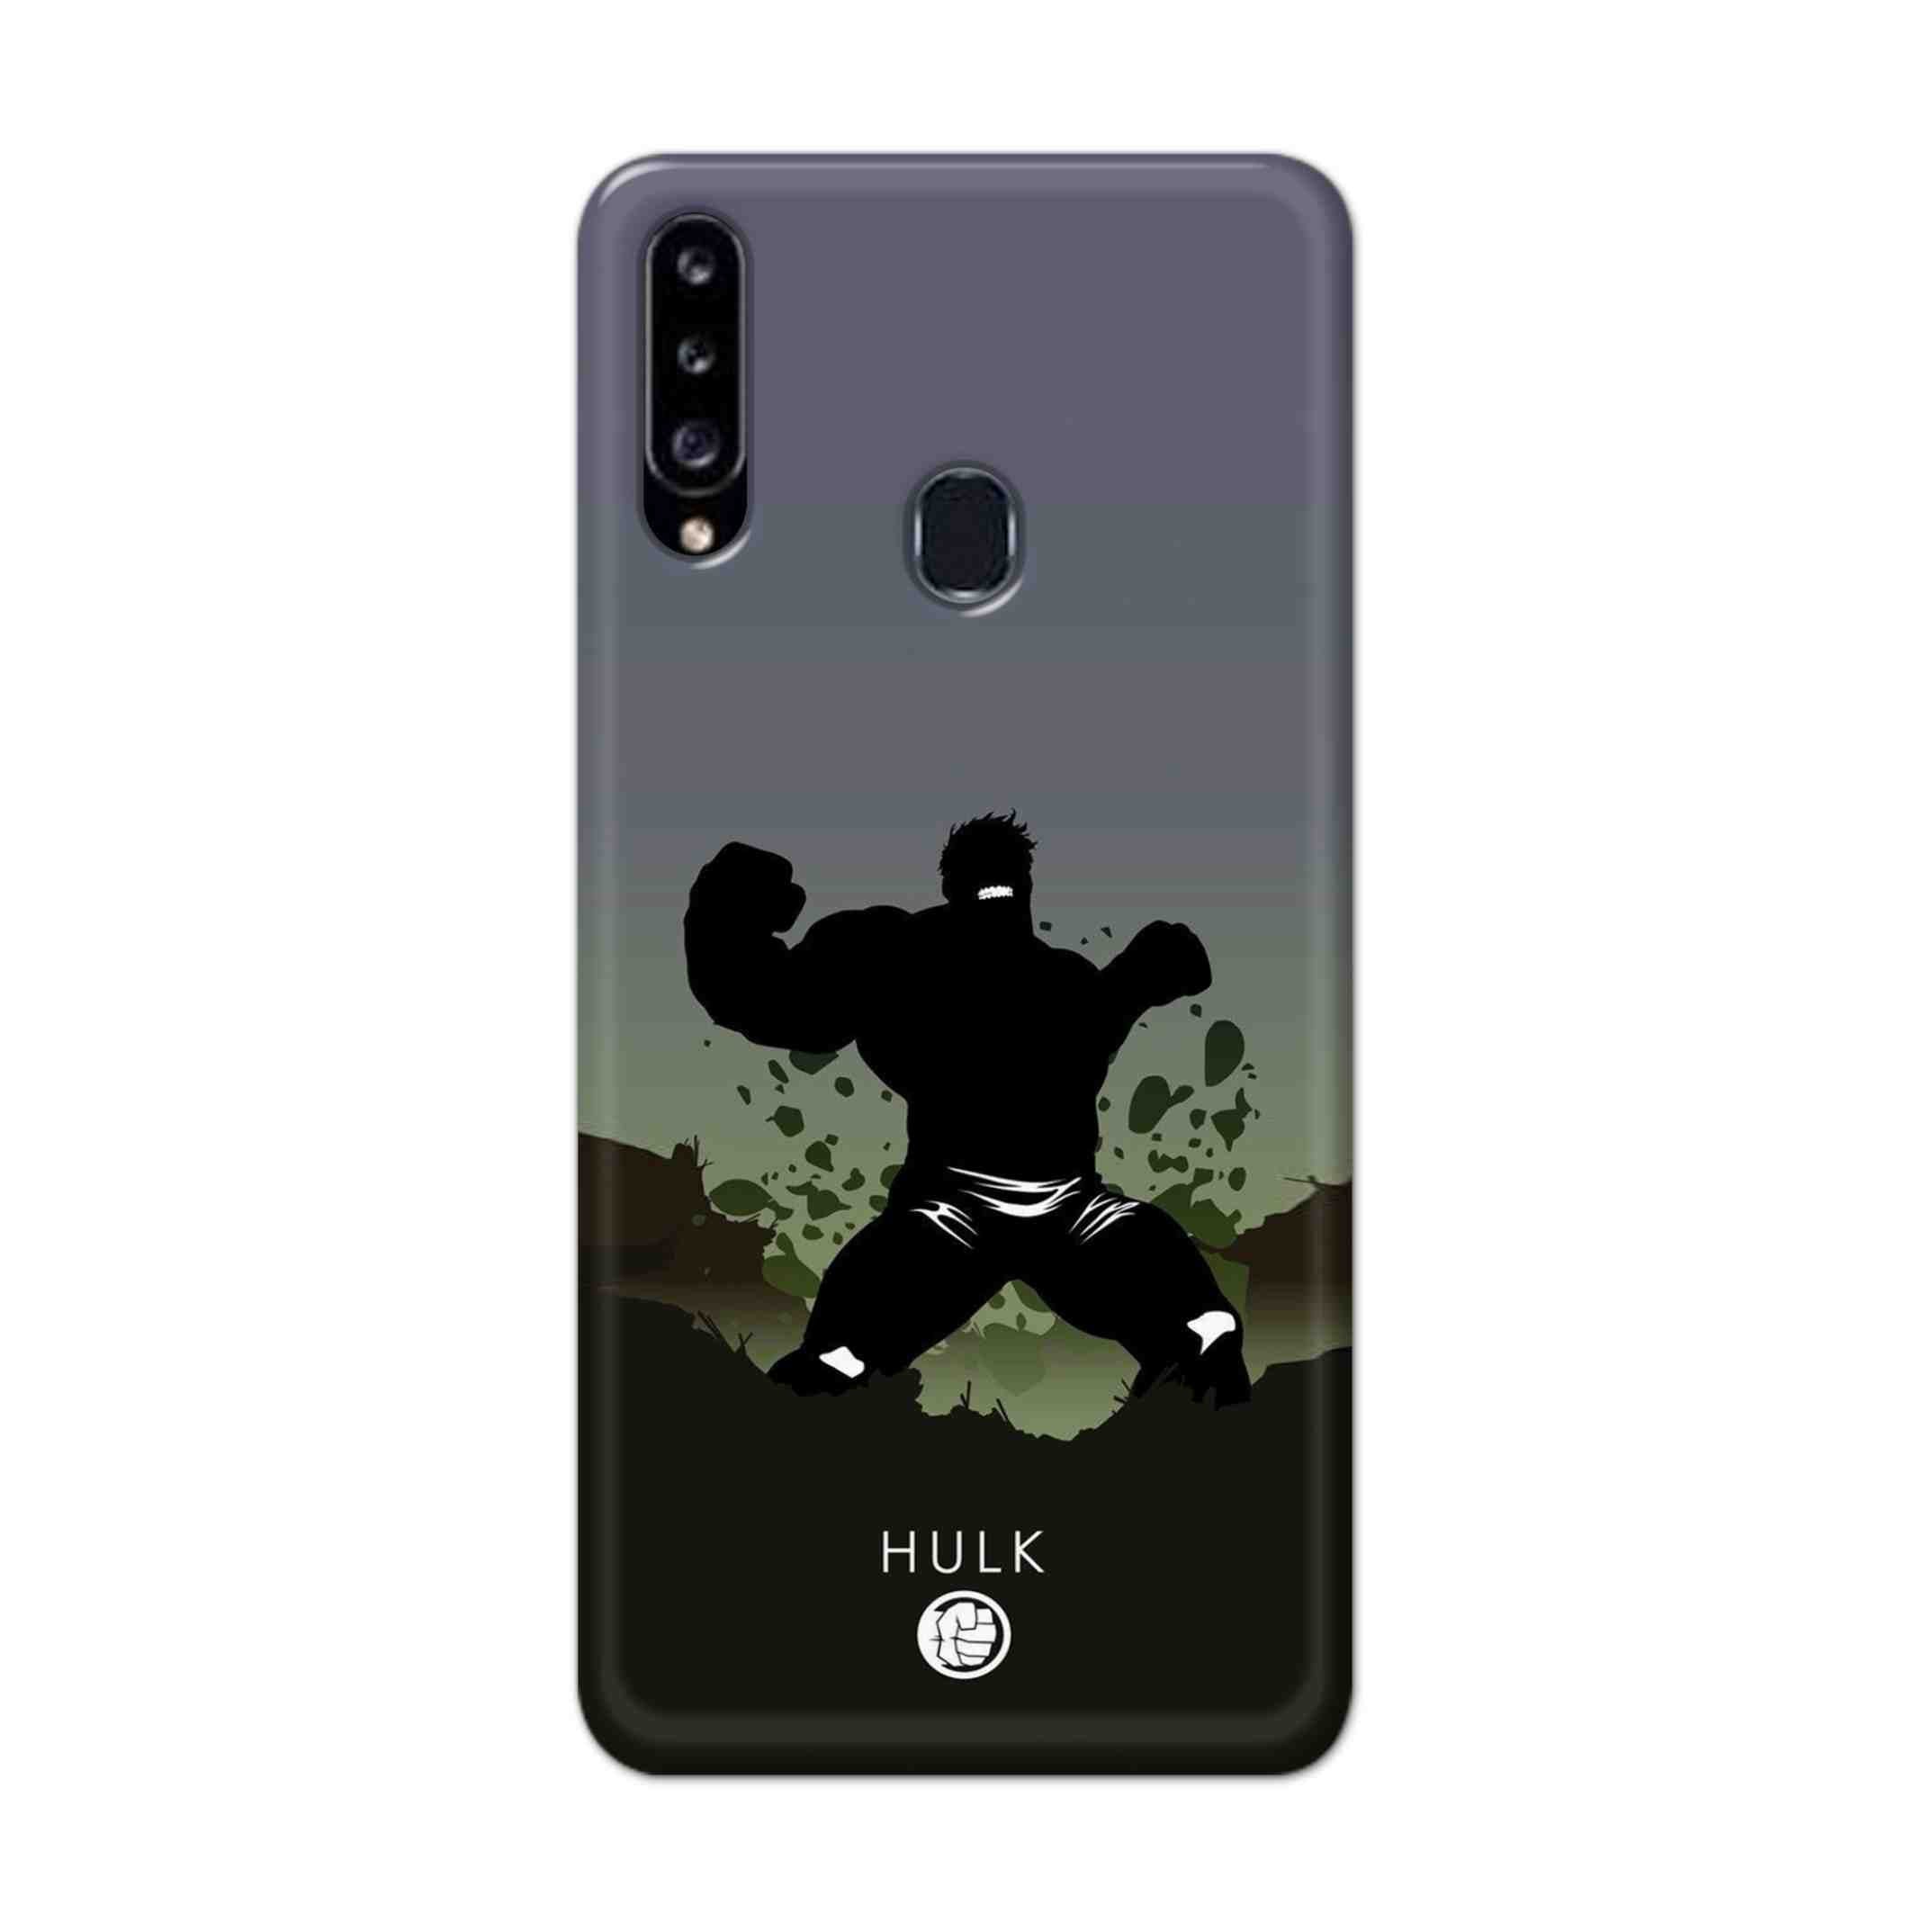 Buy Hulk Drax Hard Back Mobile Phone Case Cover For Samsung Galaxy A21 Online